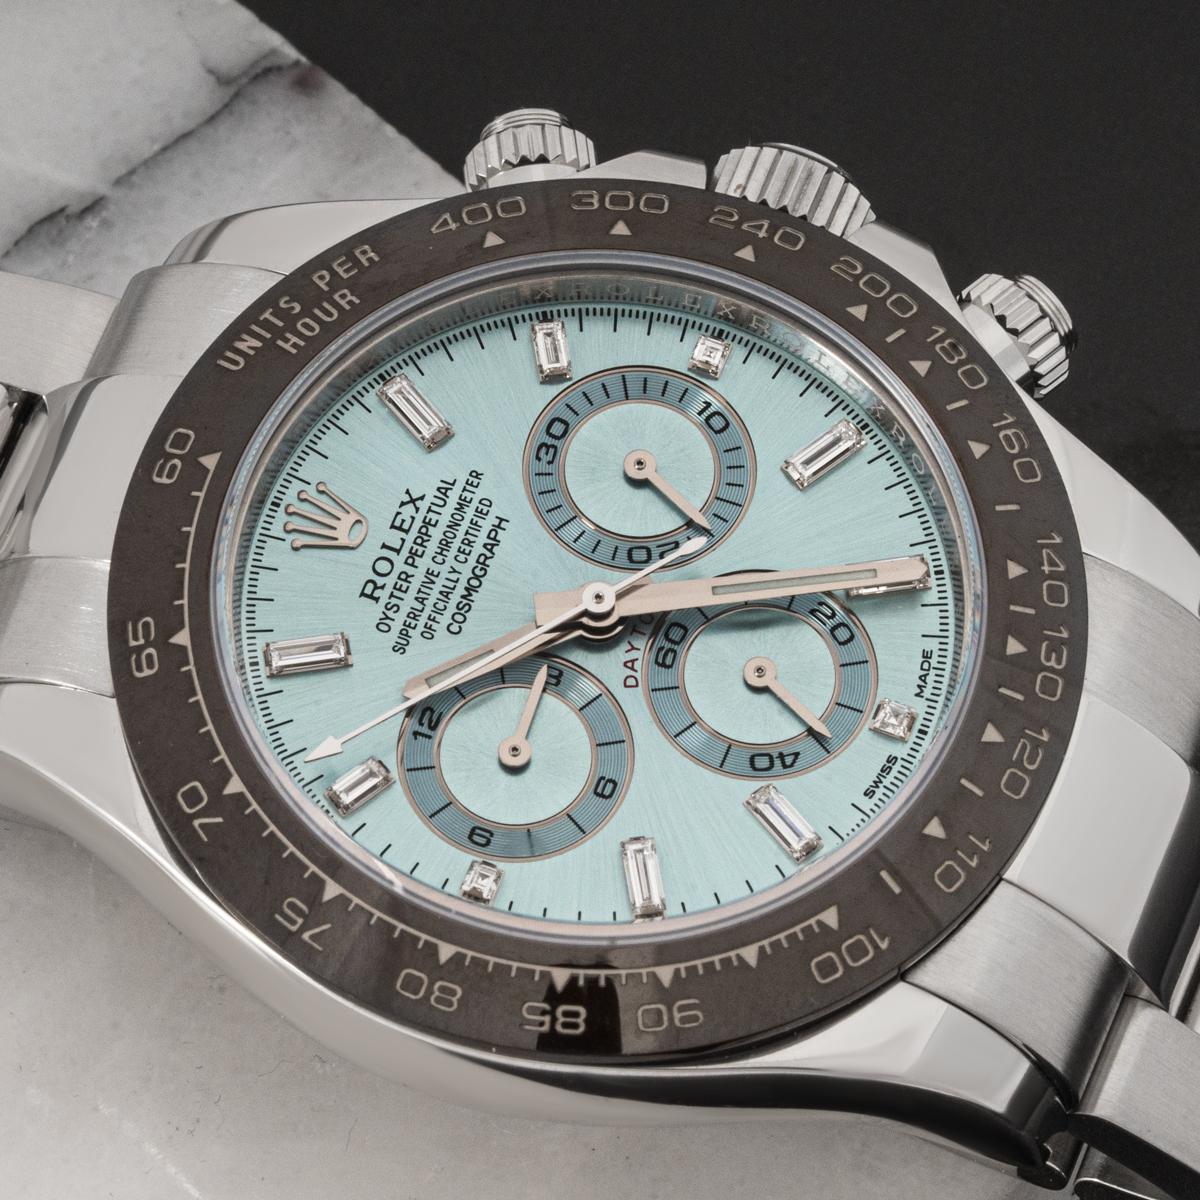 This platinum Daytona by Rolex is in mint condition. Features an ice blue dial which Rolex only use on platinum models. The dial itself is diamond set. With its tachymetric scale on the chestnut brown ceramic bezel, three snailed counters and three